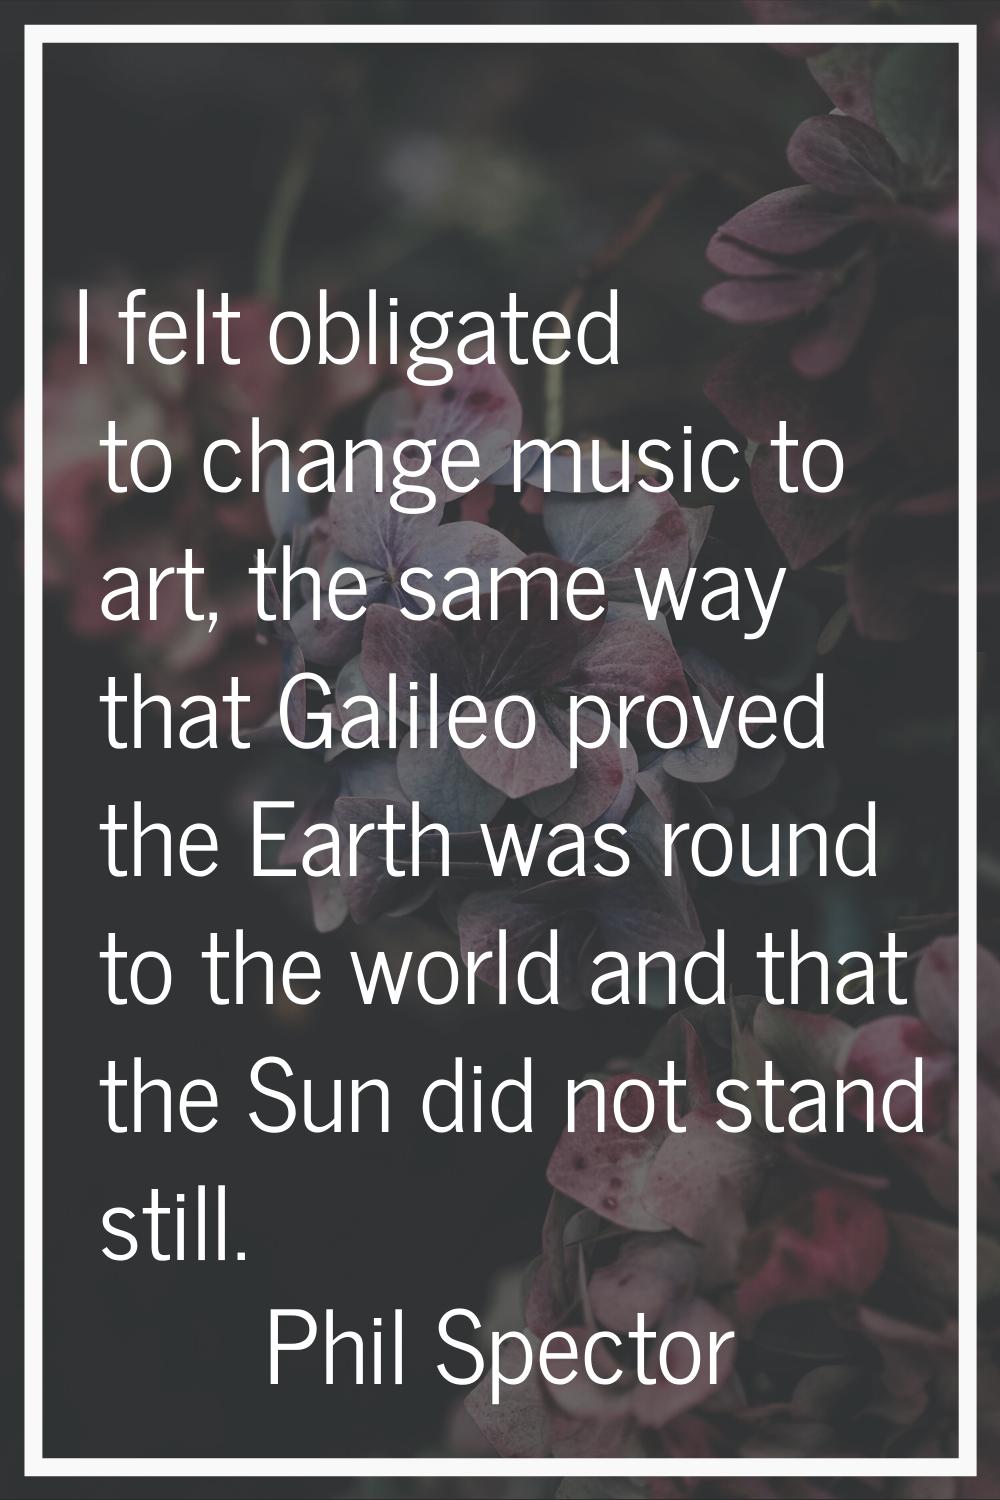 I felt obligated to change music to art, the same way that Galileo proved the Earth was round to th